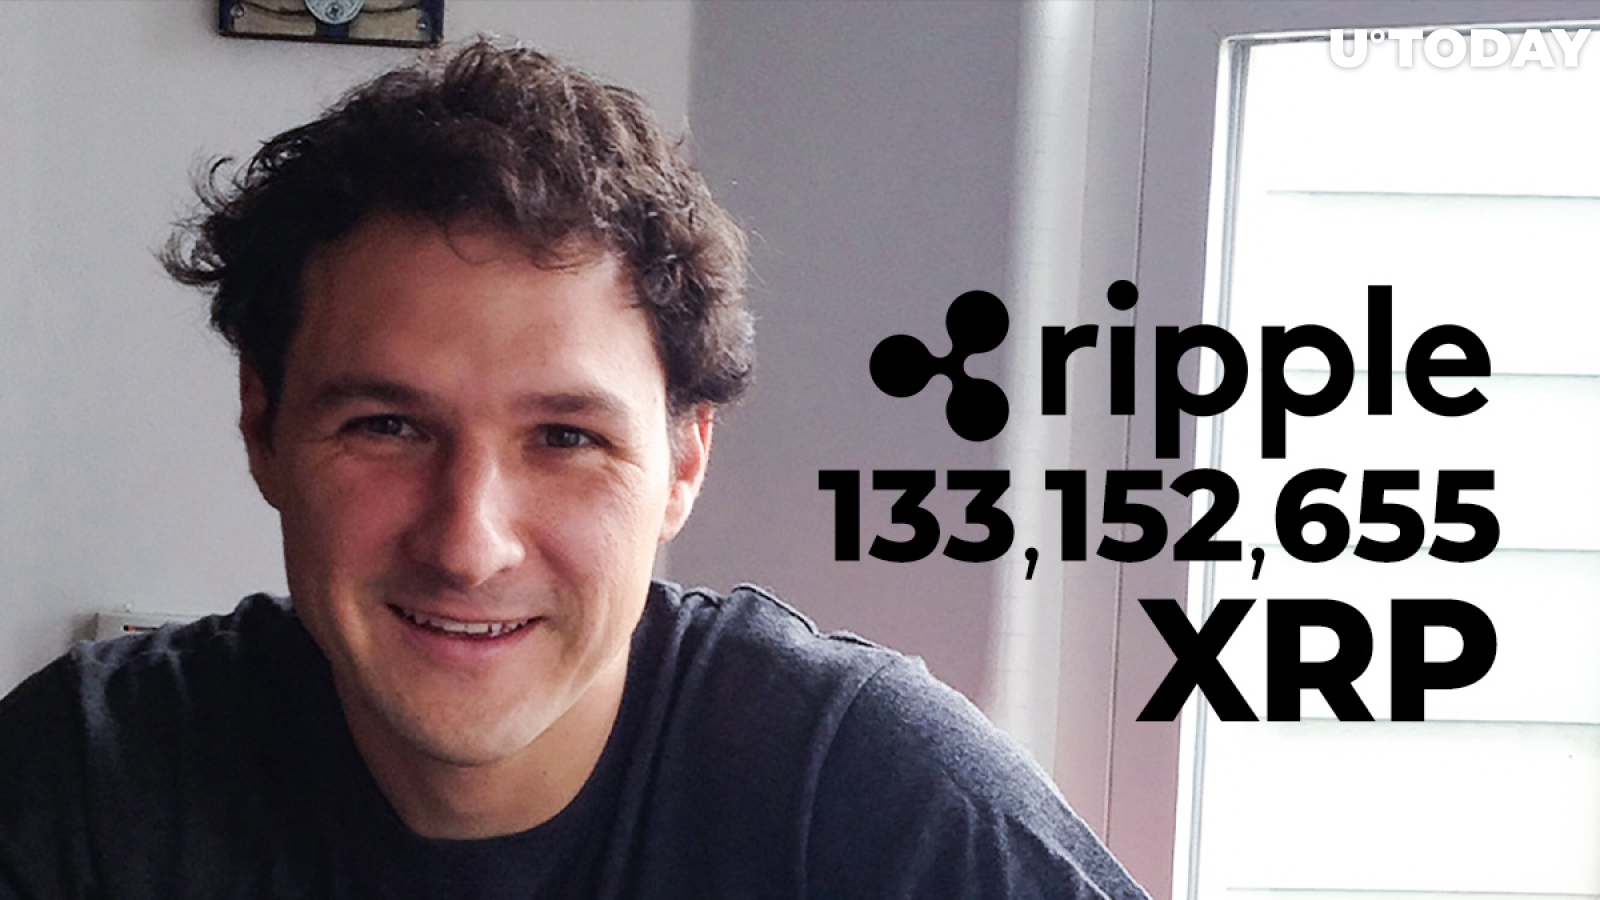 Ripple Wires 133,152,655 XRP to Jed McCaleb While XRP Tanks to $0.33